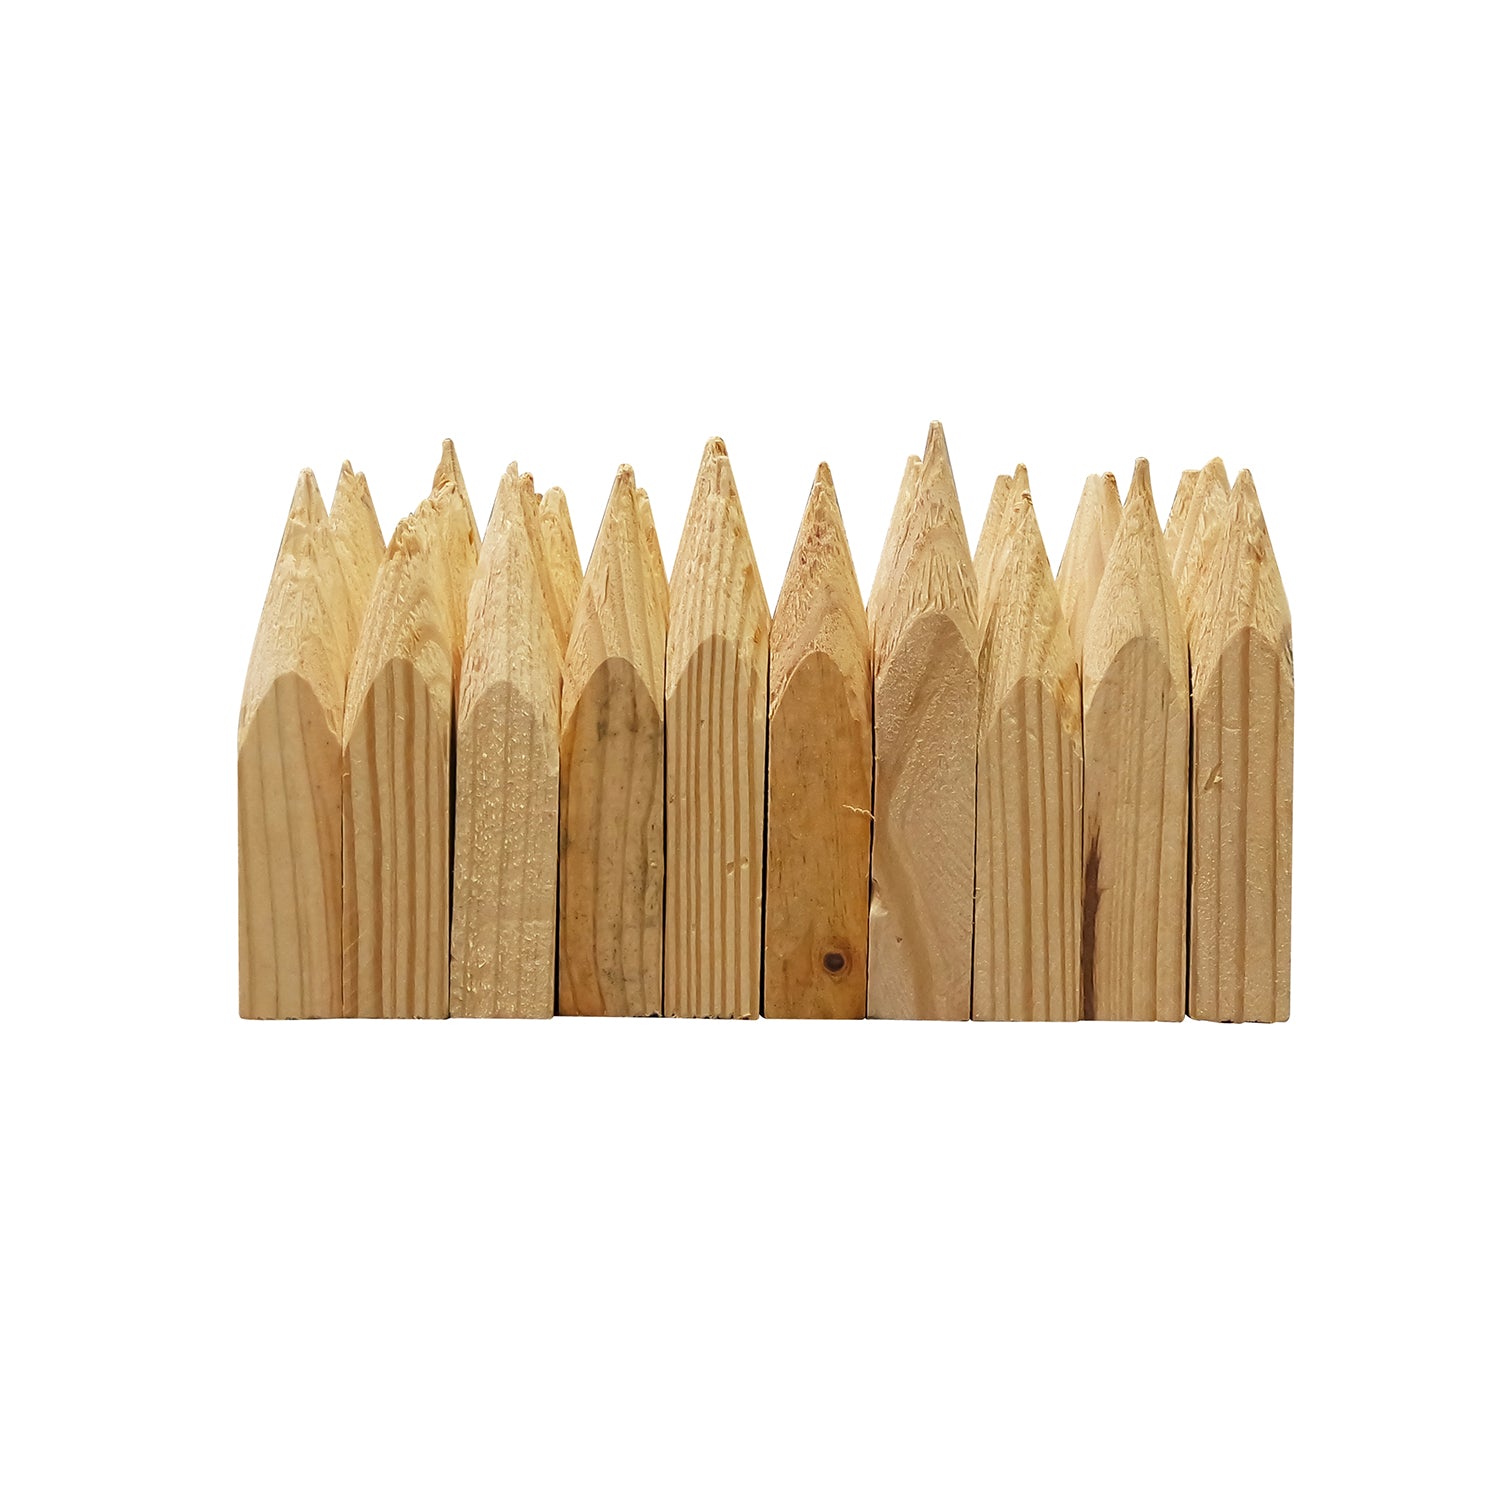 Wood Hubs 12" - Pine Bundle of 25 -Wood Stakes and Hubs- eGPS Solutions Inc.